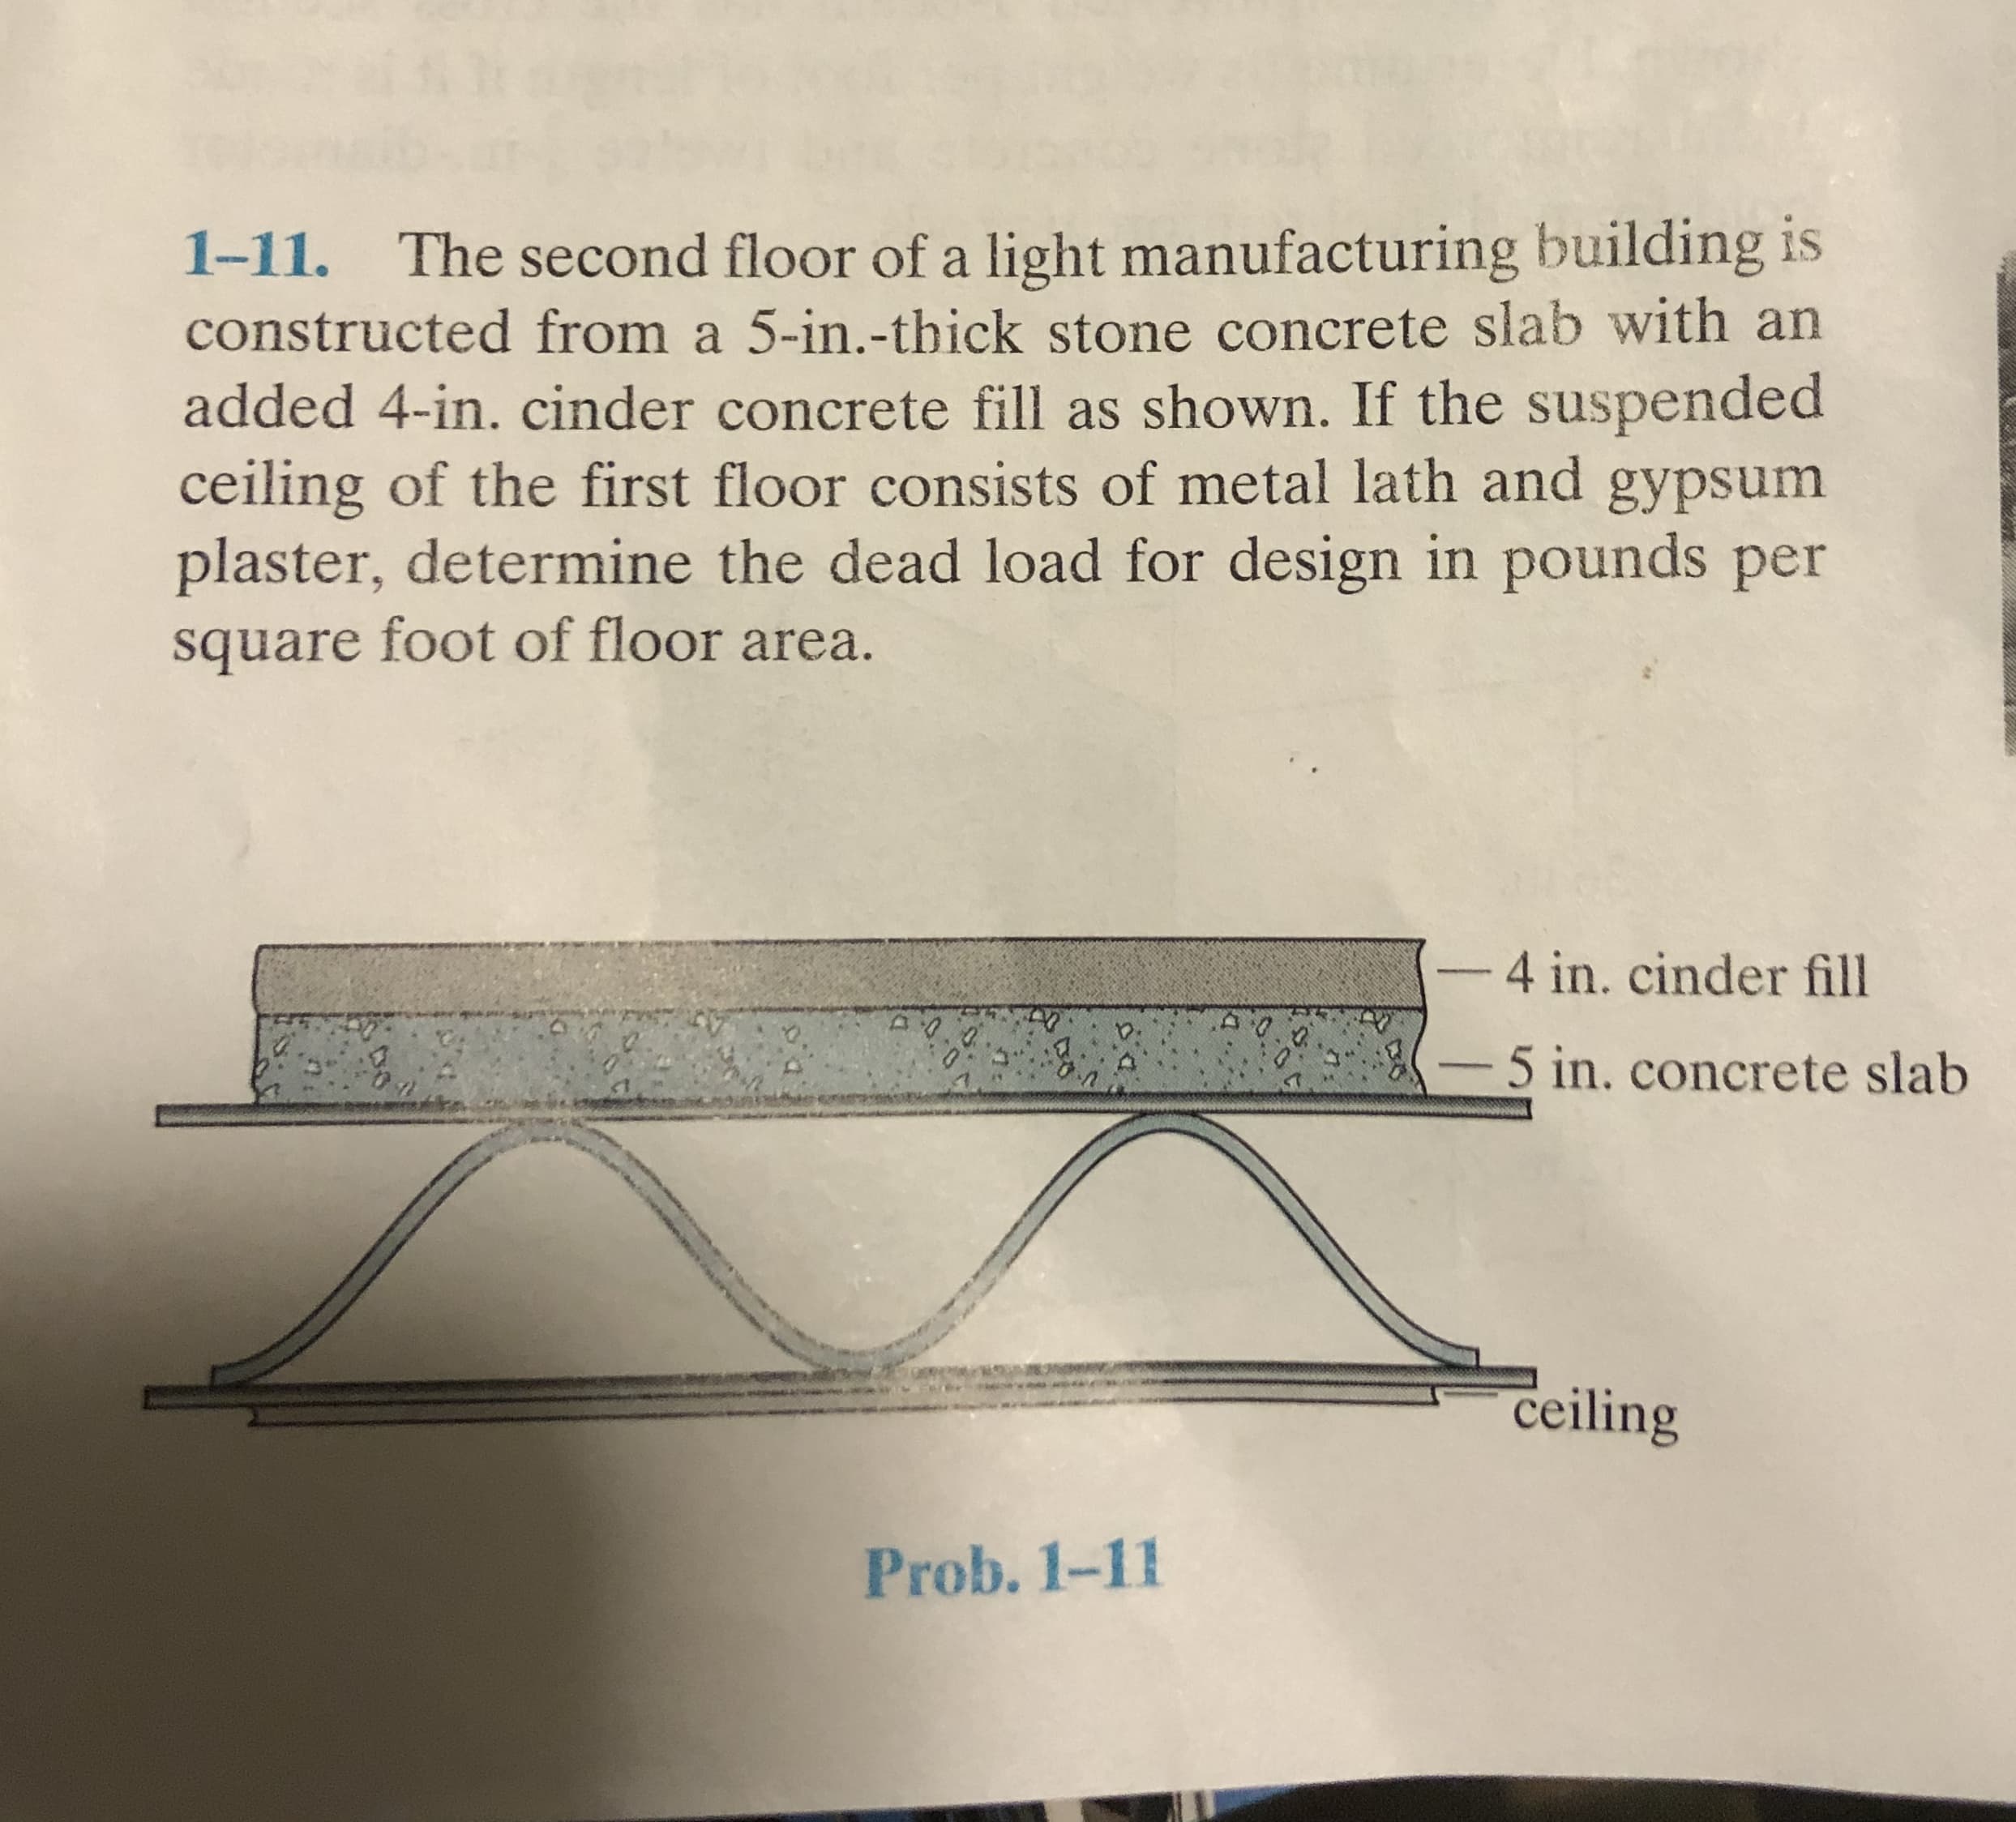 1-11. The second floor of a light manufacturing building
constructed from a 5-in.-thick stone concrete slab with an
added 4-in. cinder concrete fill as shown. If the suspended
ceiling of the first floor consists of metal lath and gypsum
plaster, determine the dead load for design in pounds per
square foot of floor area.
-4 in. cinder fill
-5 in. concrete slab
ceiling
Prob. 1-11
